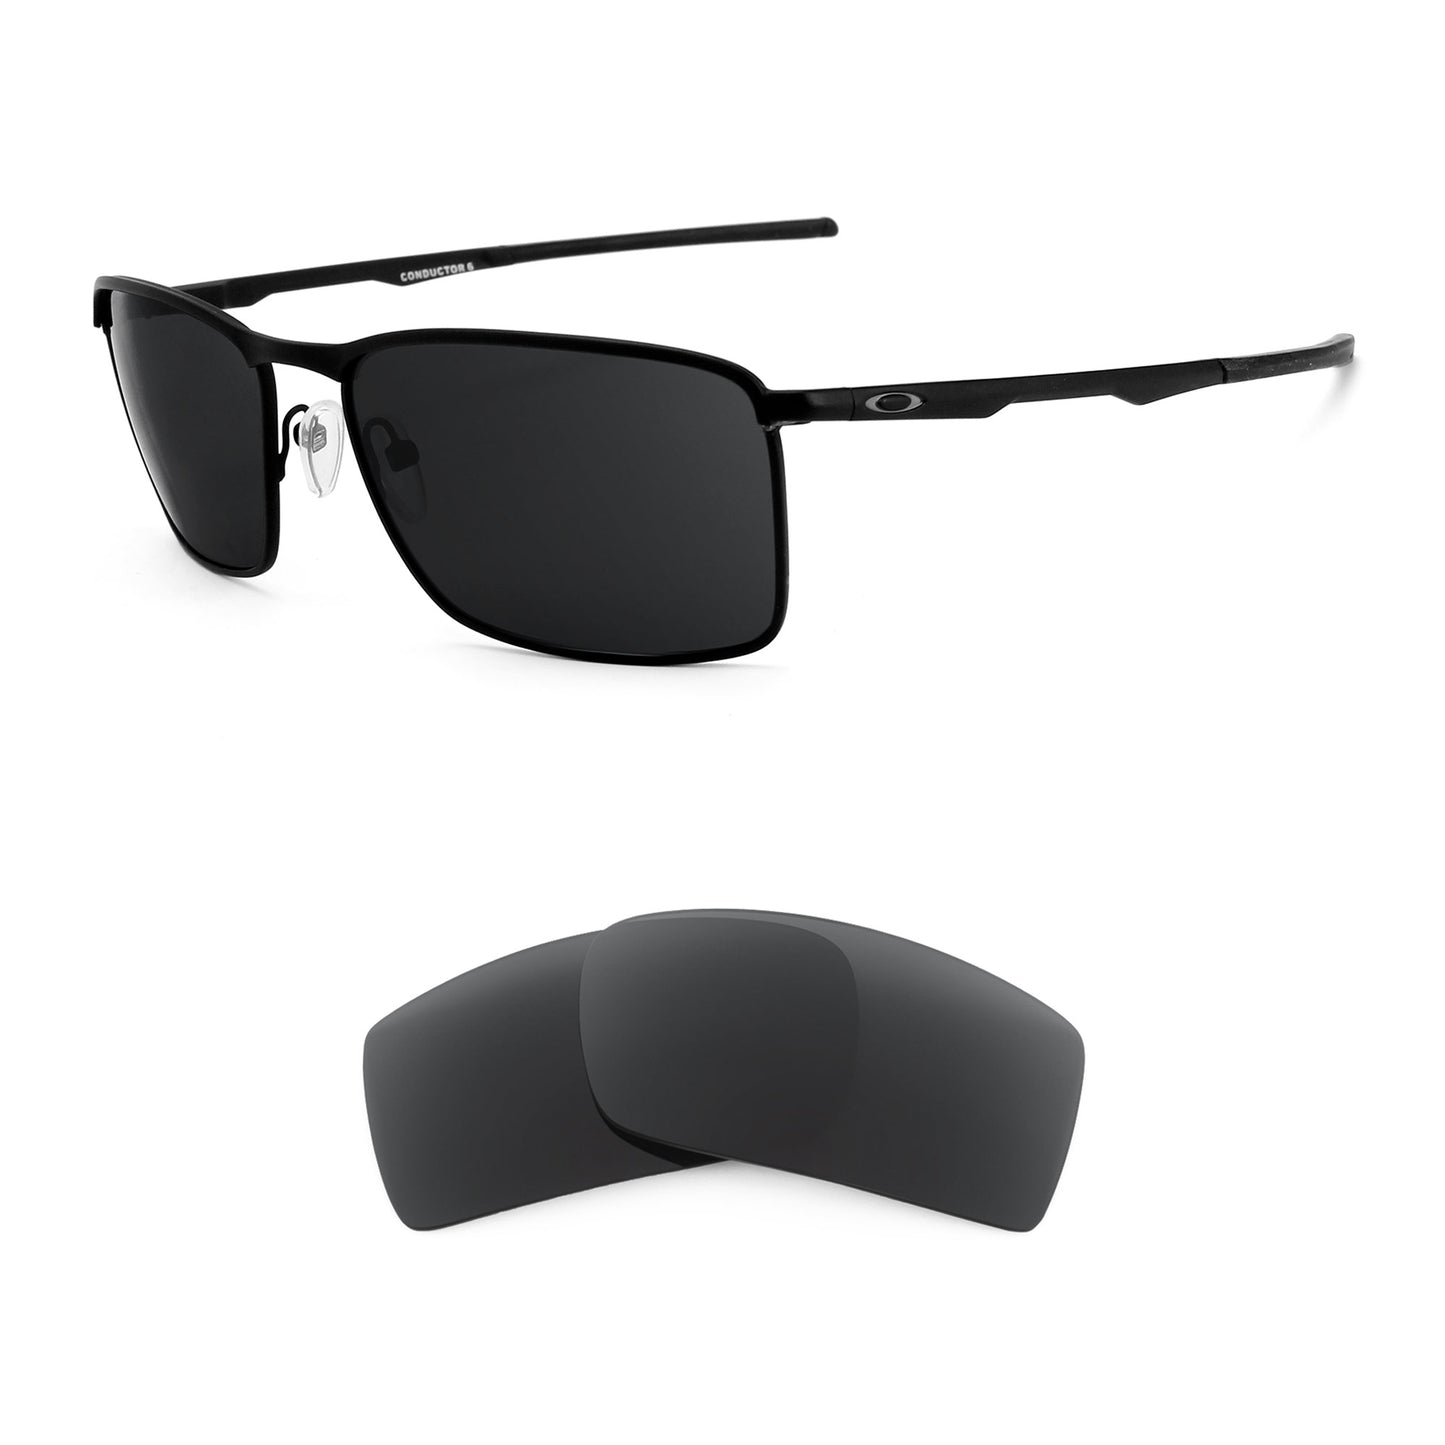 Oakley Conductor 6 sunglasses with replacement lenses